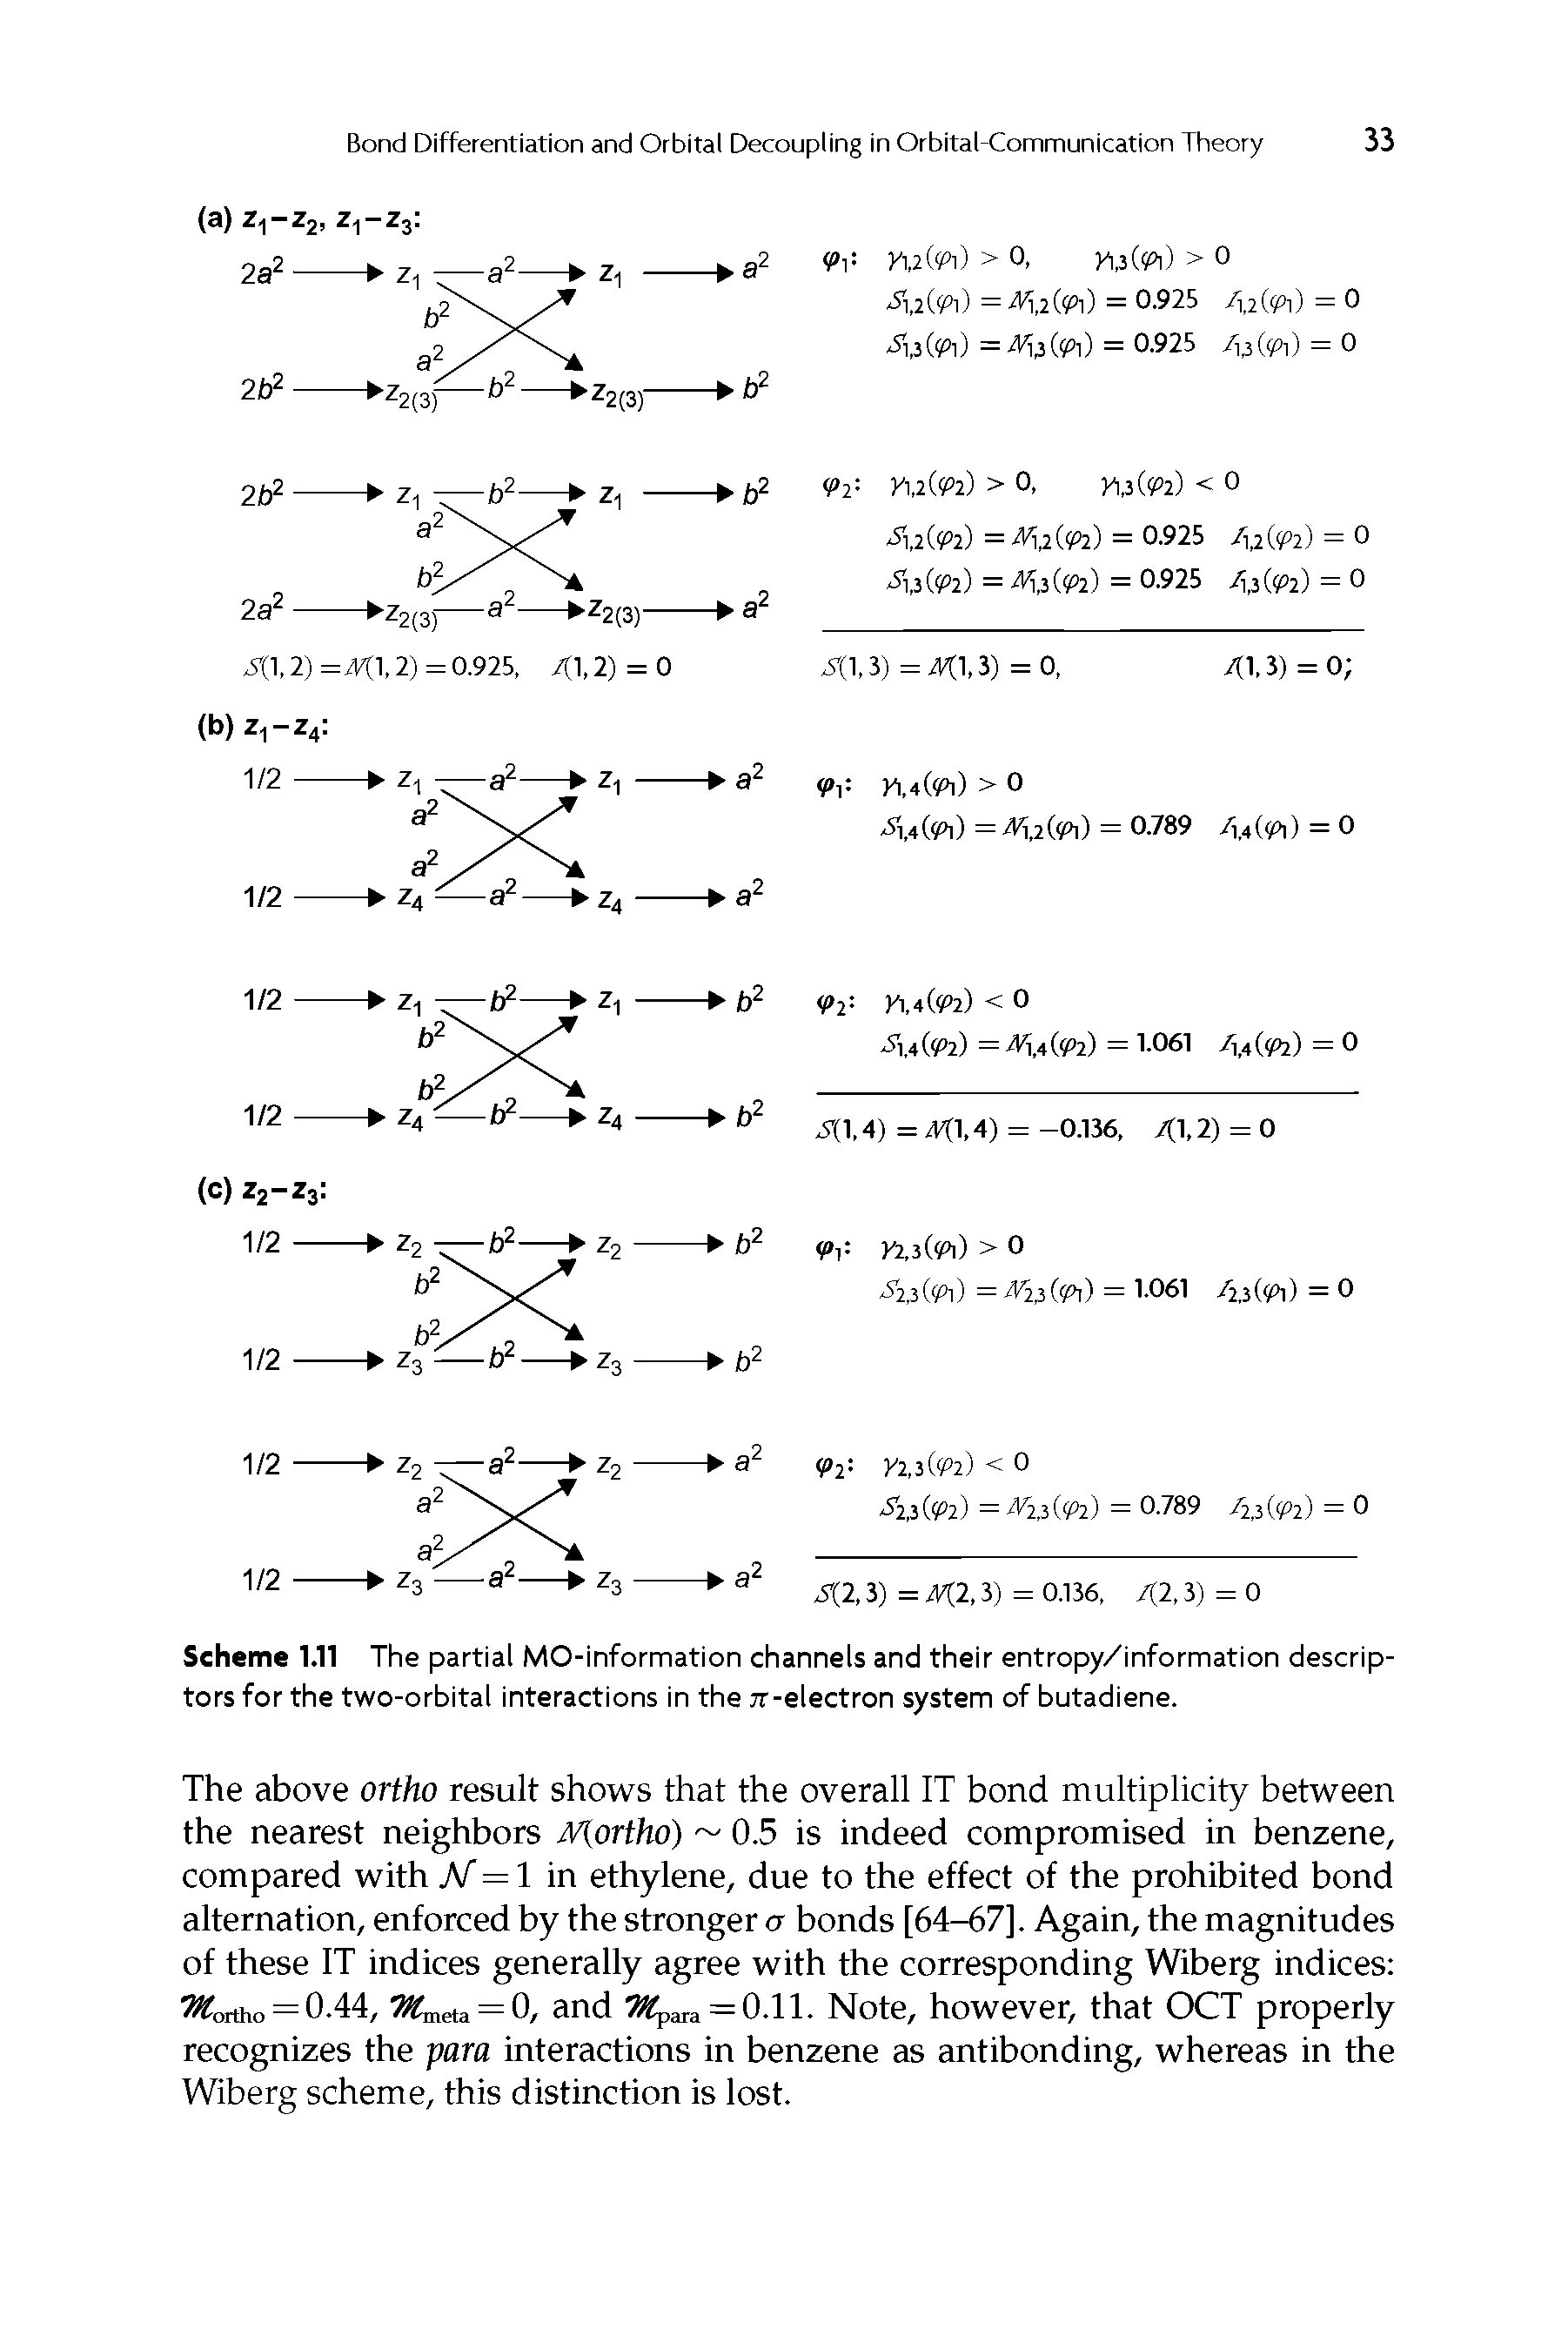 Scheme 1.11 The partial MO-information channels and their entropy/information descriptors for the two-orbital interactions in the jr-electron system of butadiene.